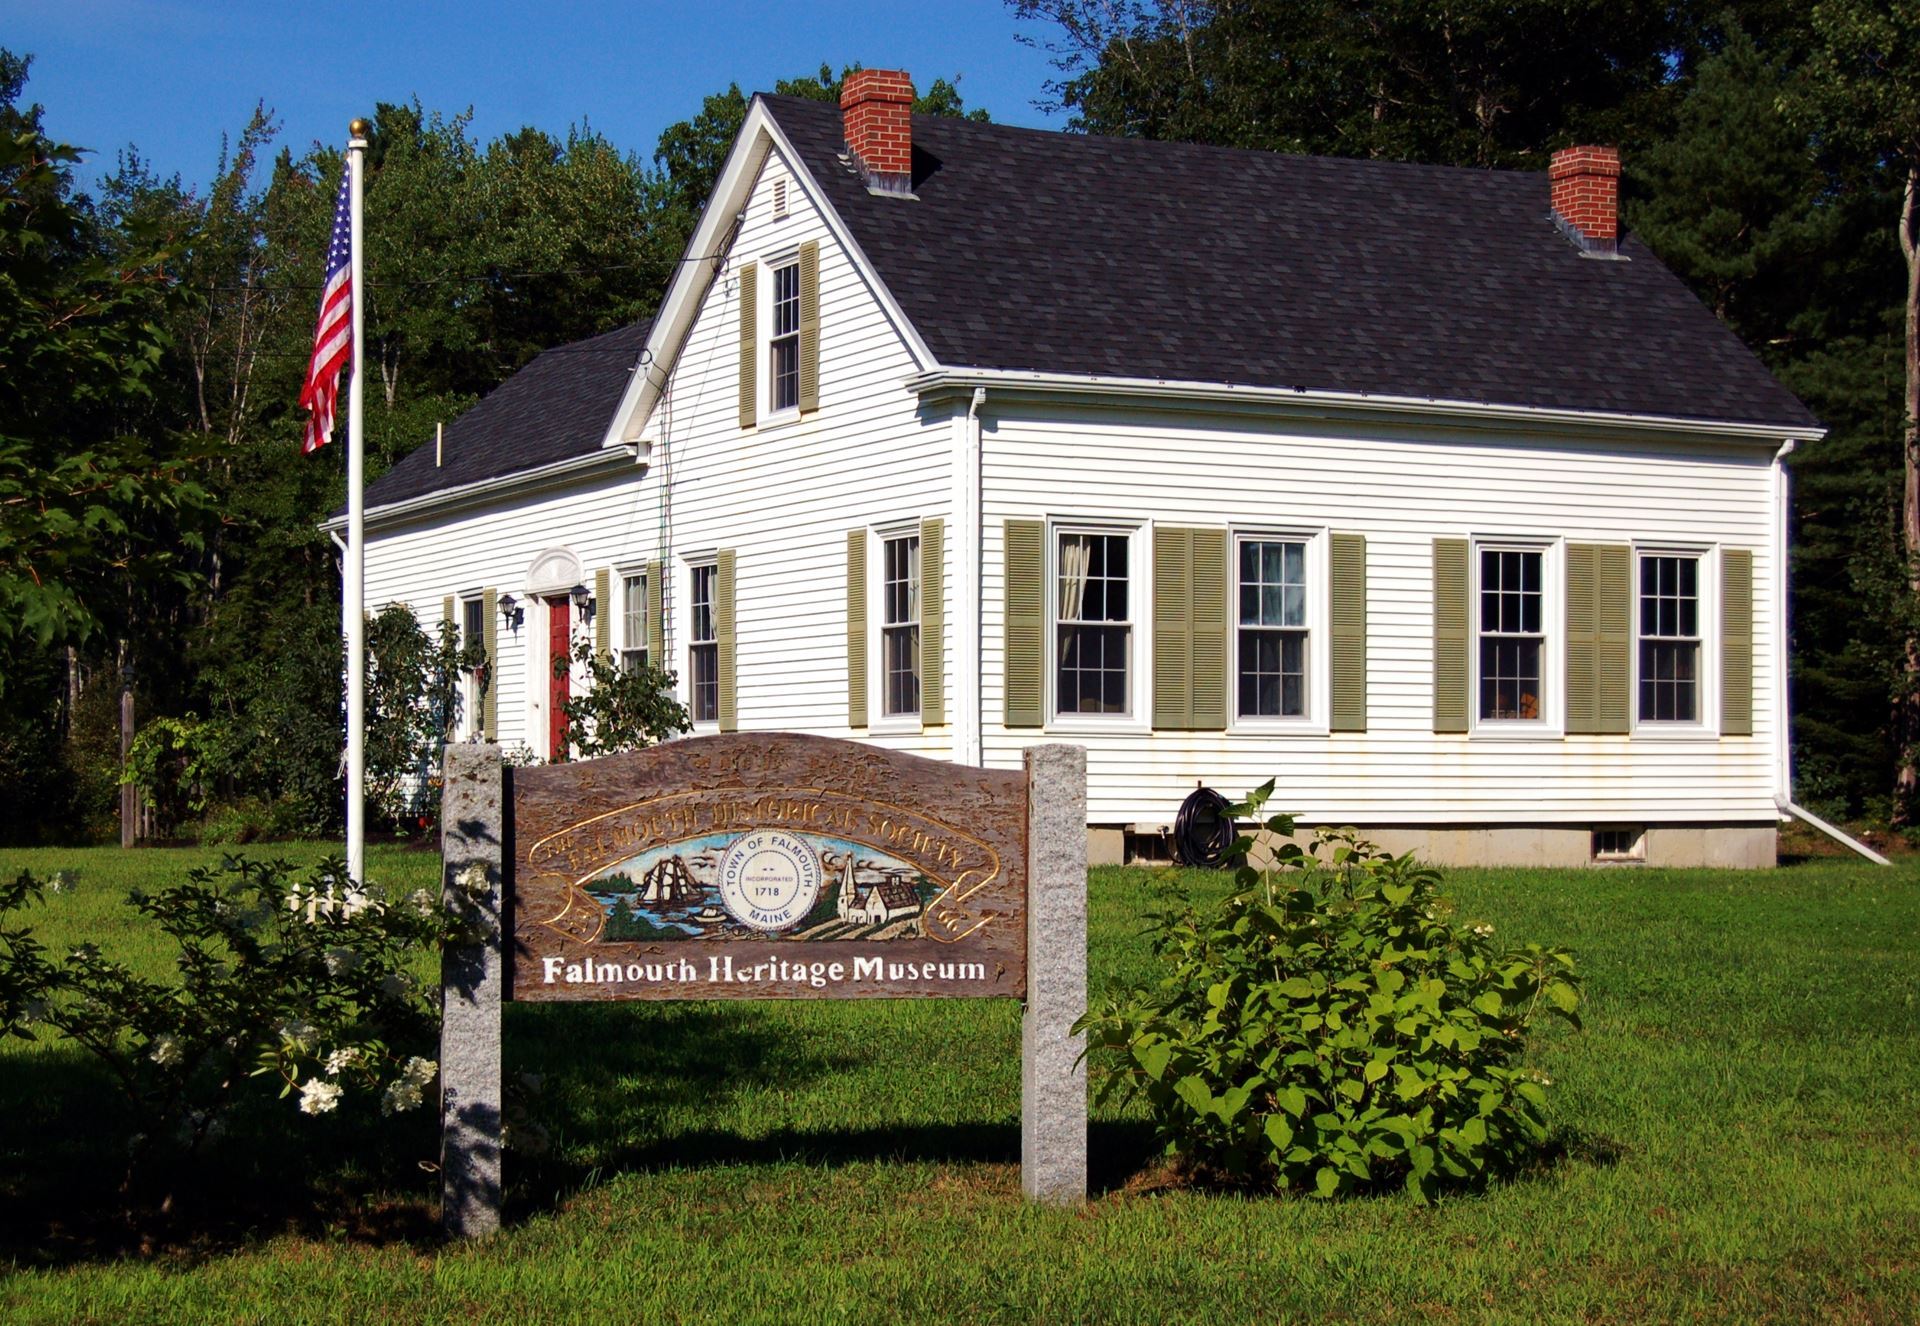 Falmouth Heritage Museum with Old Sign